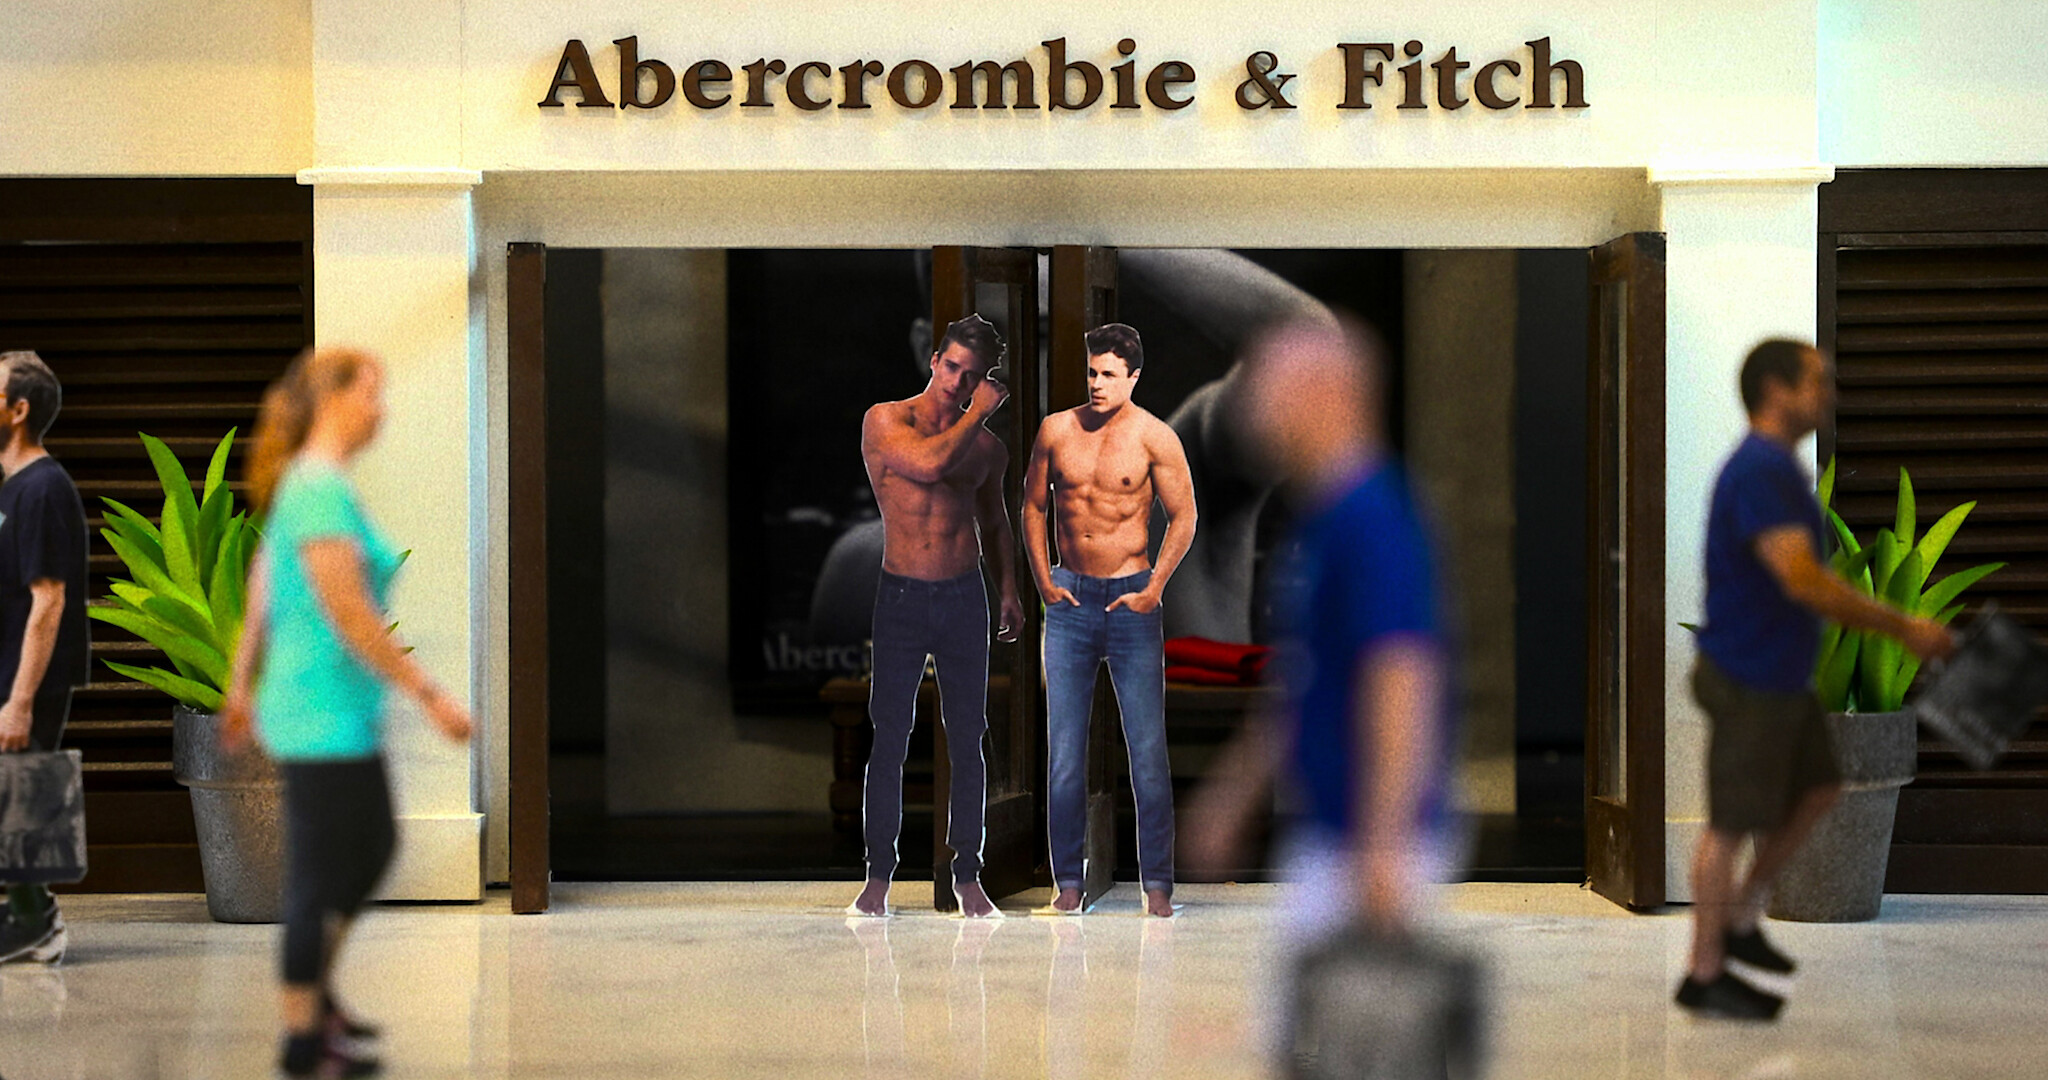 I'm an Adult Man, and I'm Wearing Abercrombie & Fitch Fierce Again